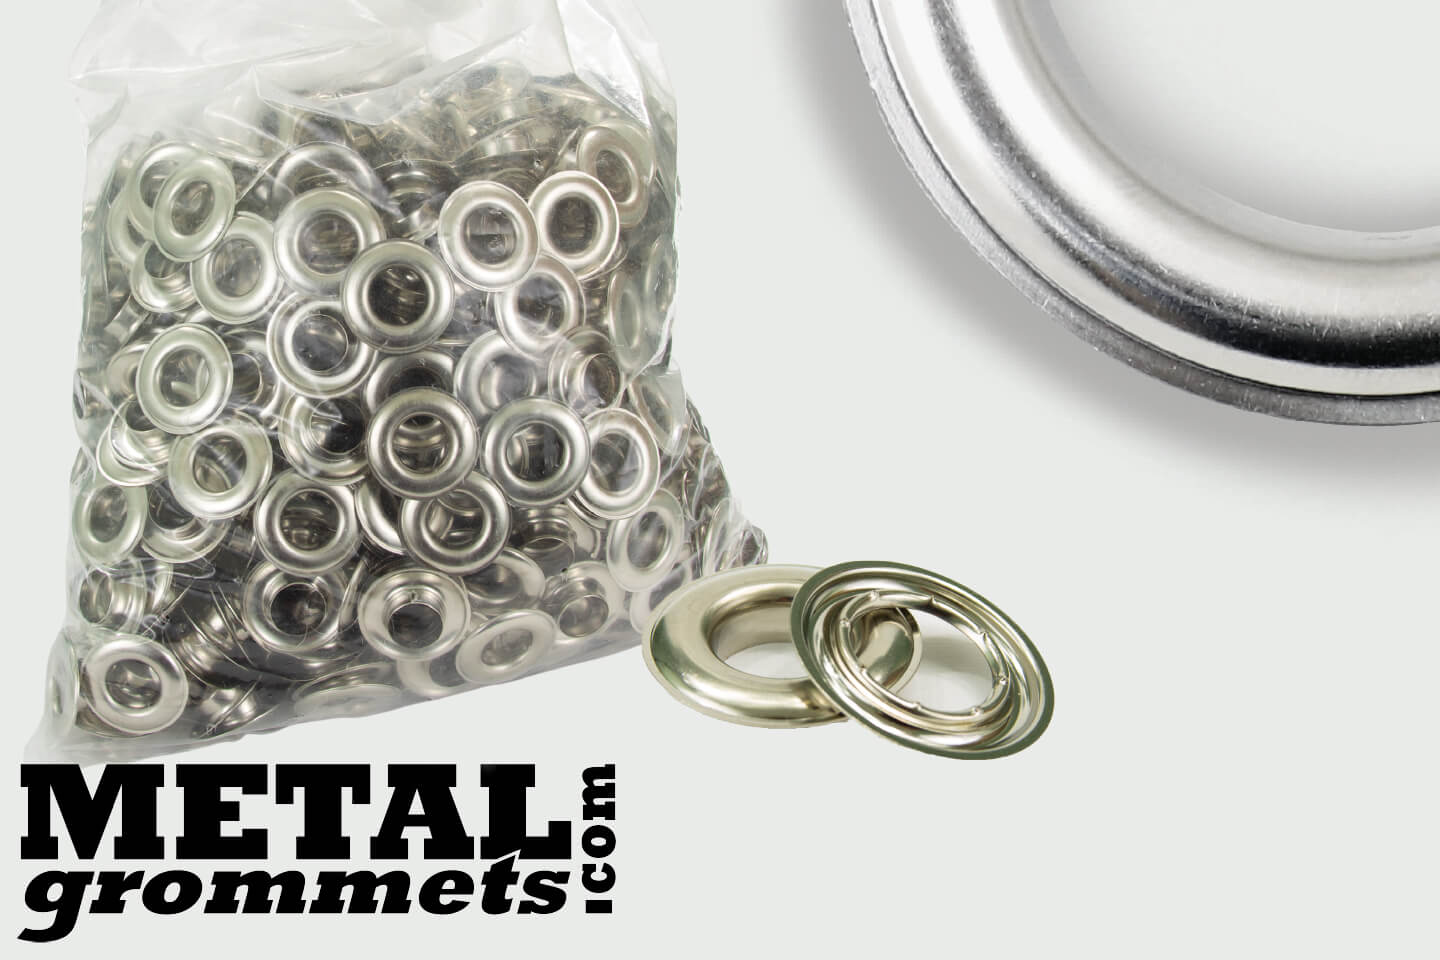 #5 (5/8 - 0.625 Hole Size) Nickel Plated Grommets & Washers